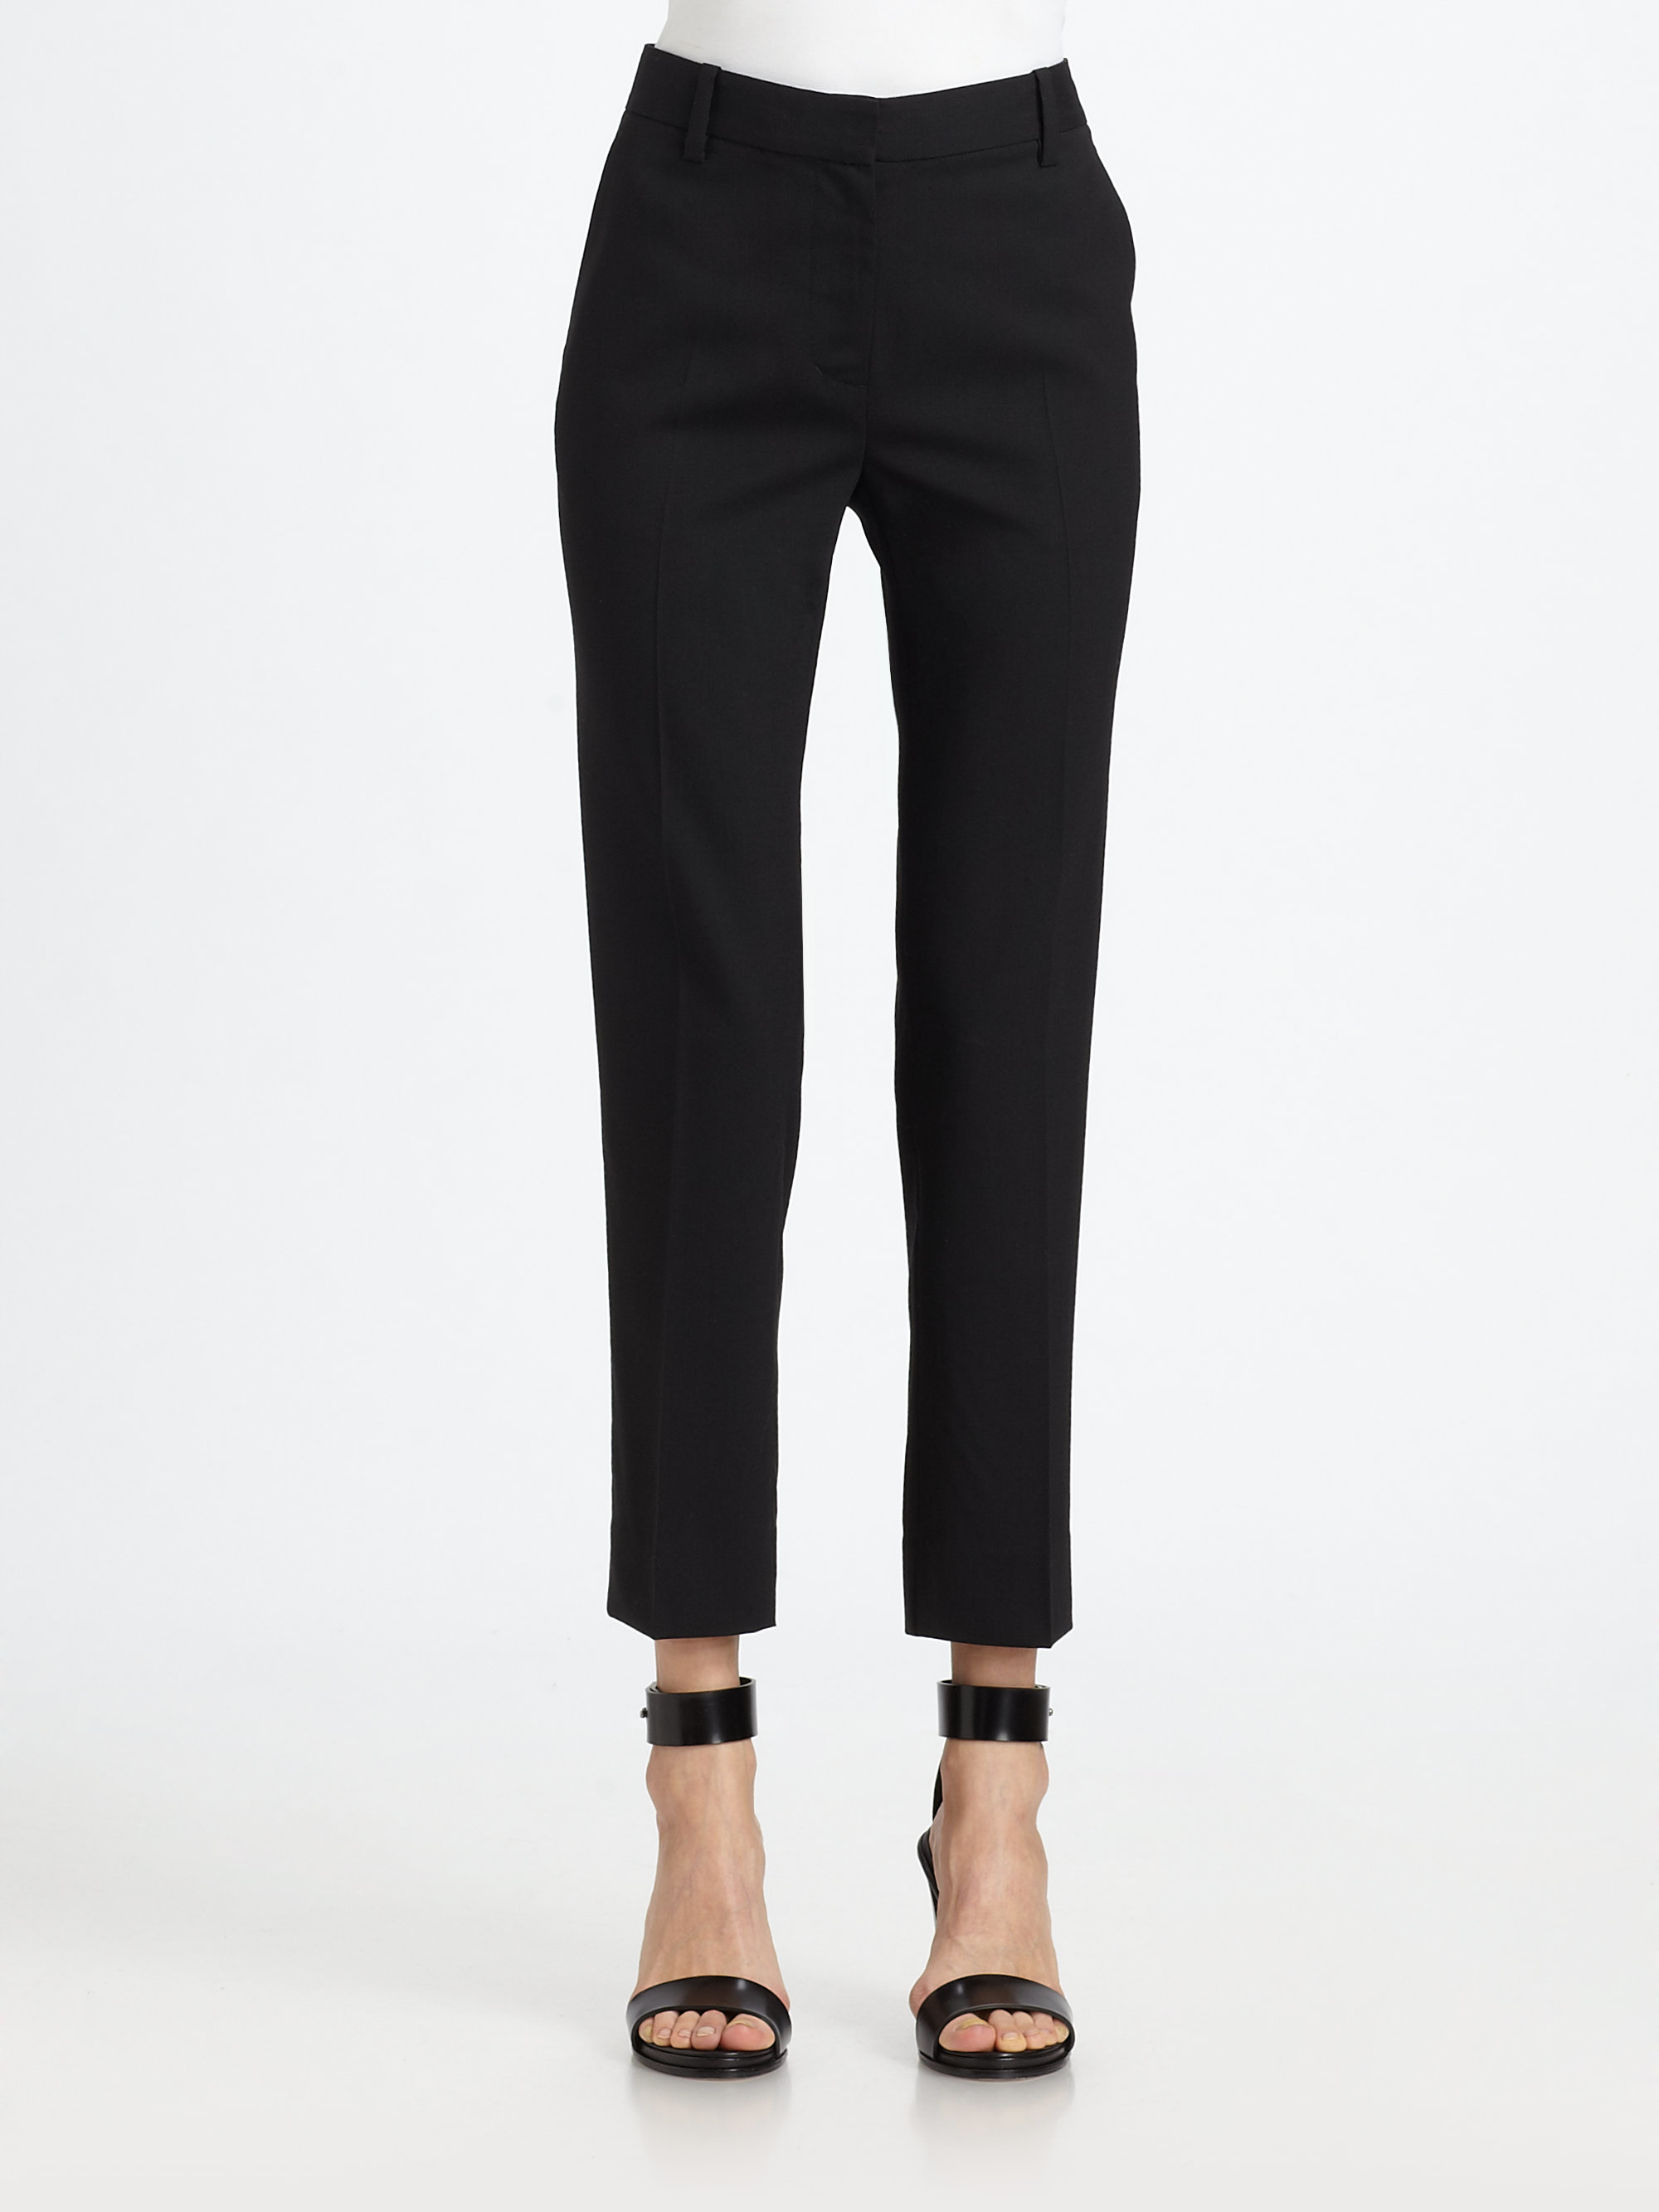 Lyst - 3.1 Phillip Lim Stretch-wool Pencil Trousers in Black